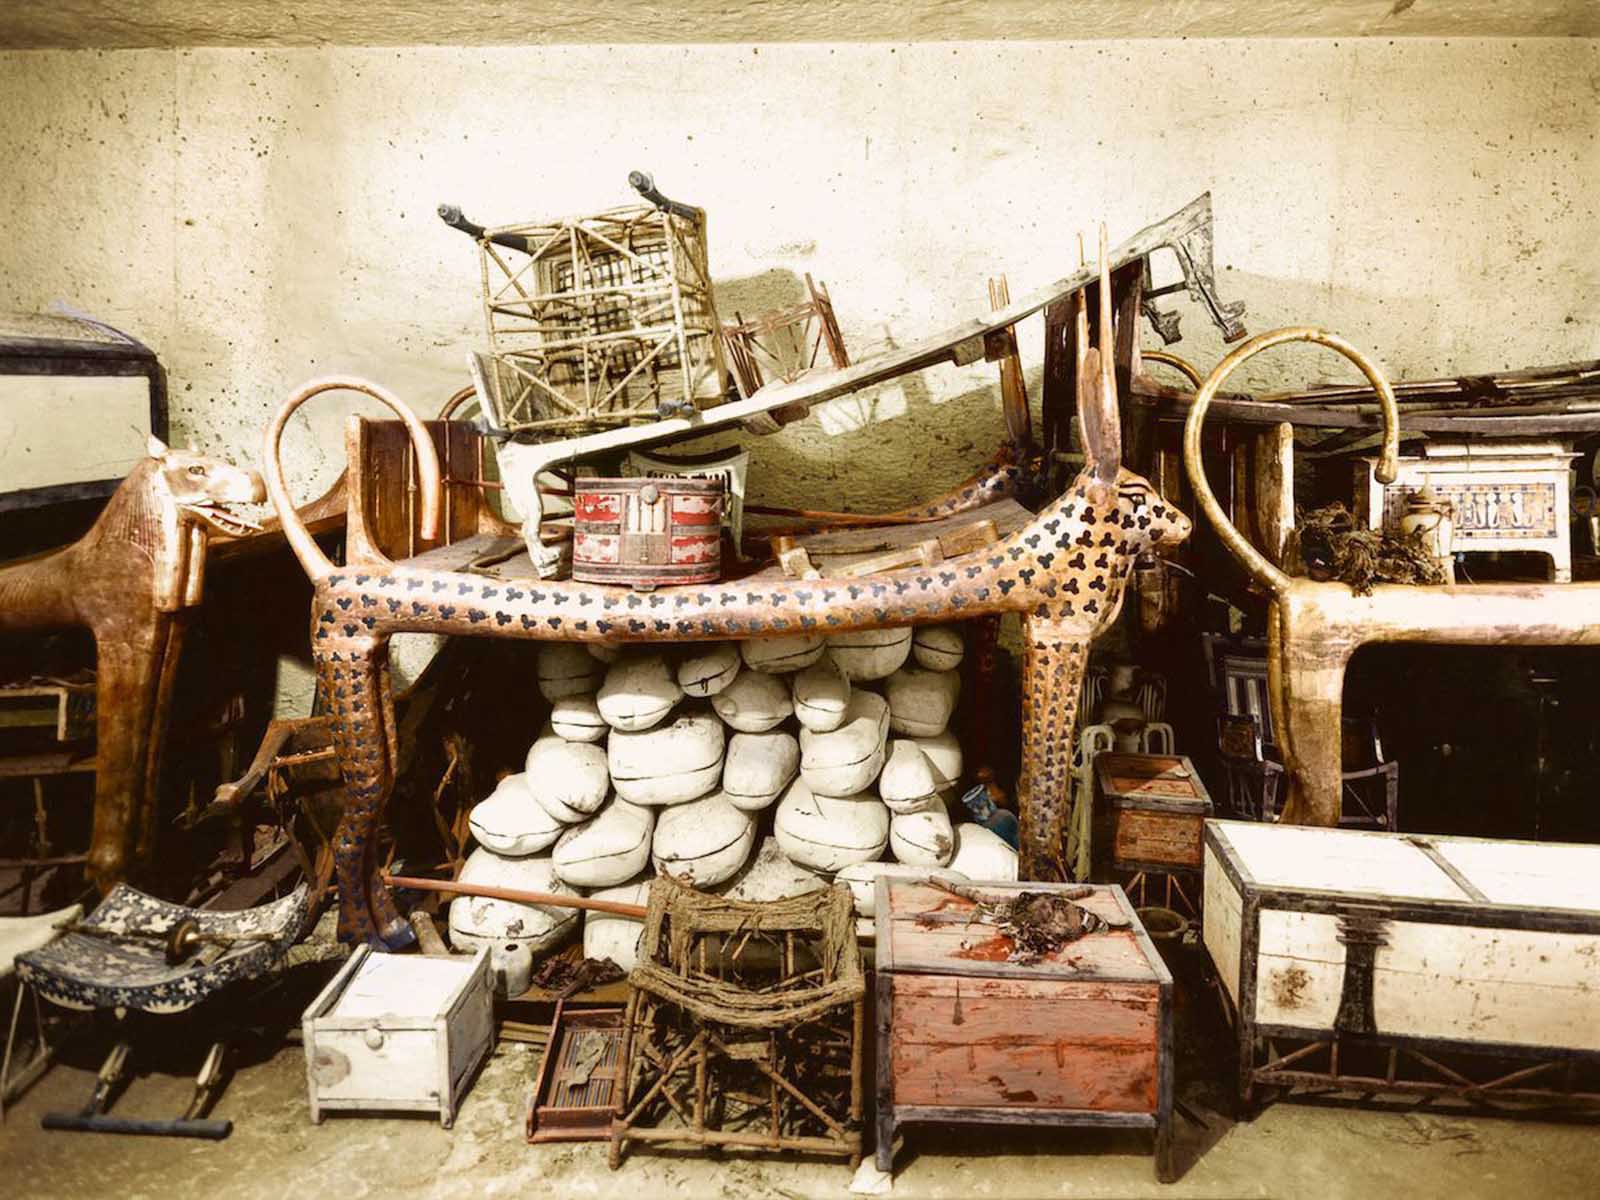 A ceremonial bed in the shape of the Celestial Cow, surrounded by provisions and other objects in the antechamber of the tomb.